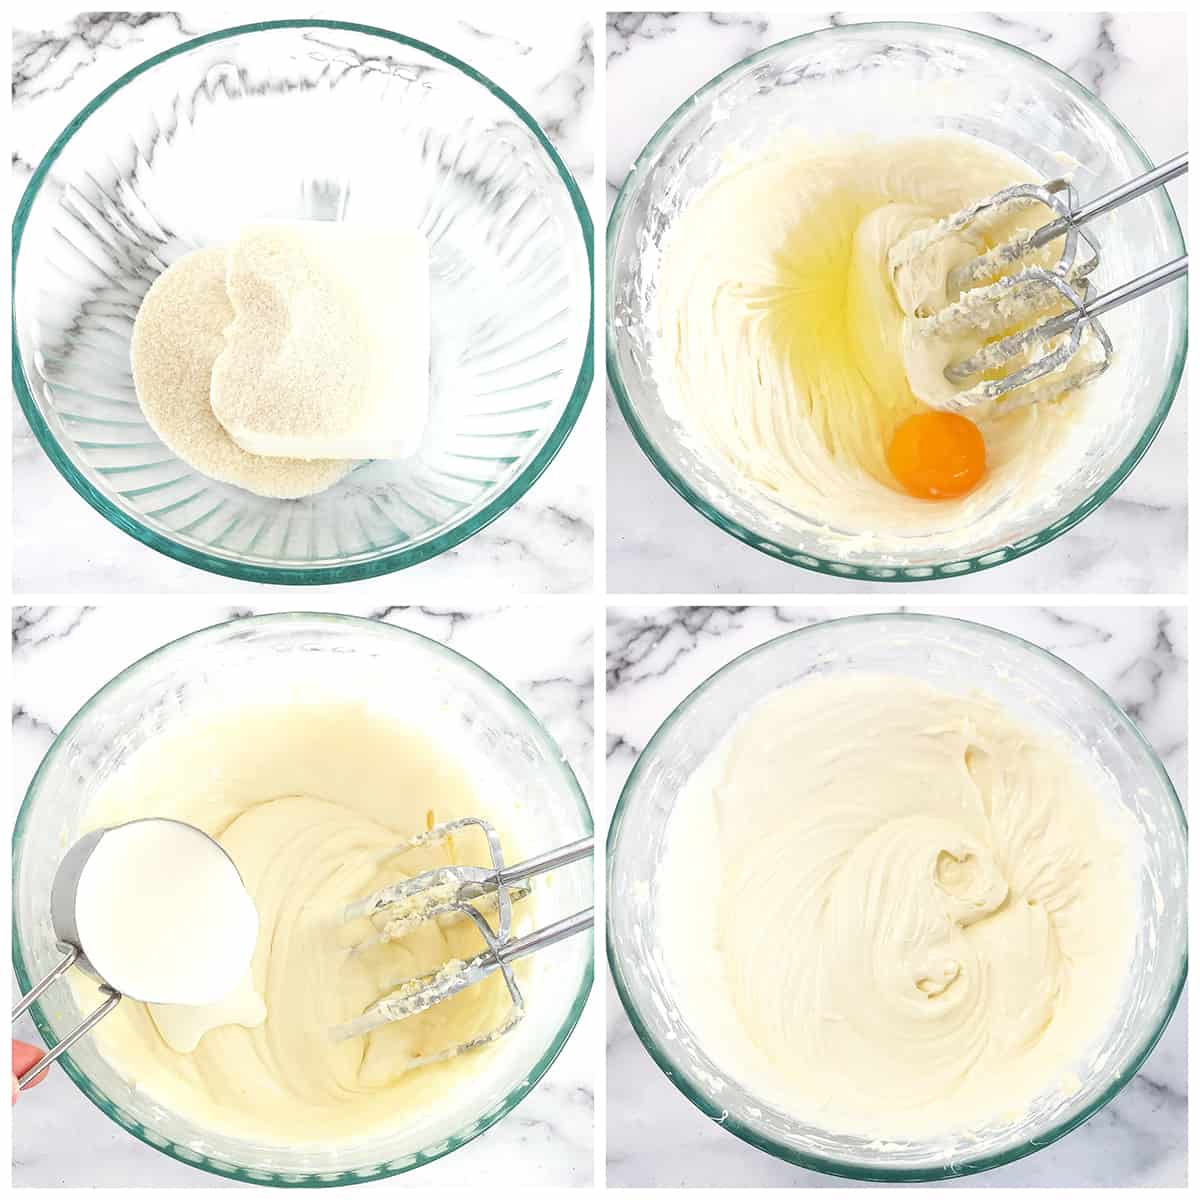 How to make cream cheese filling